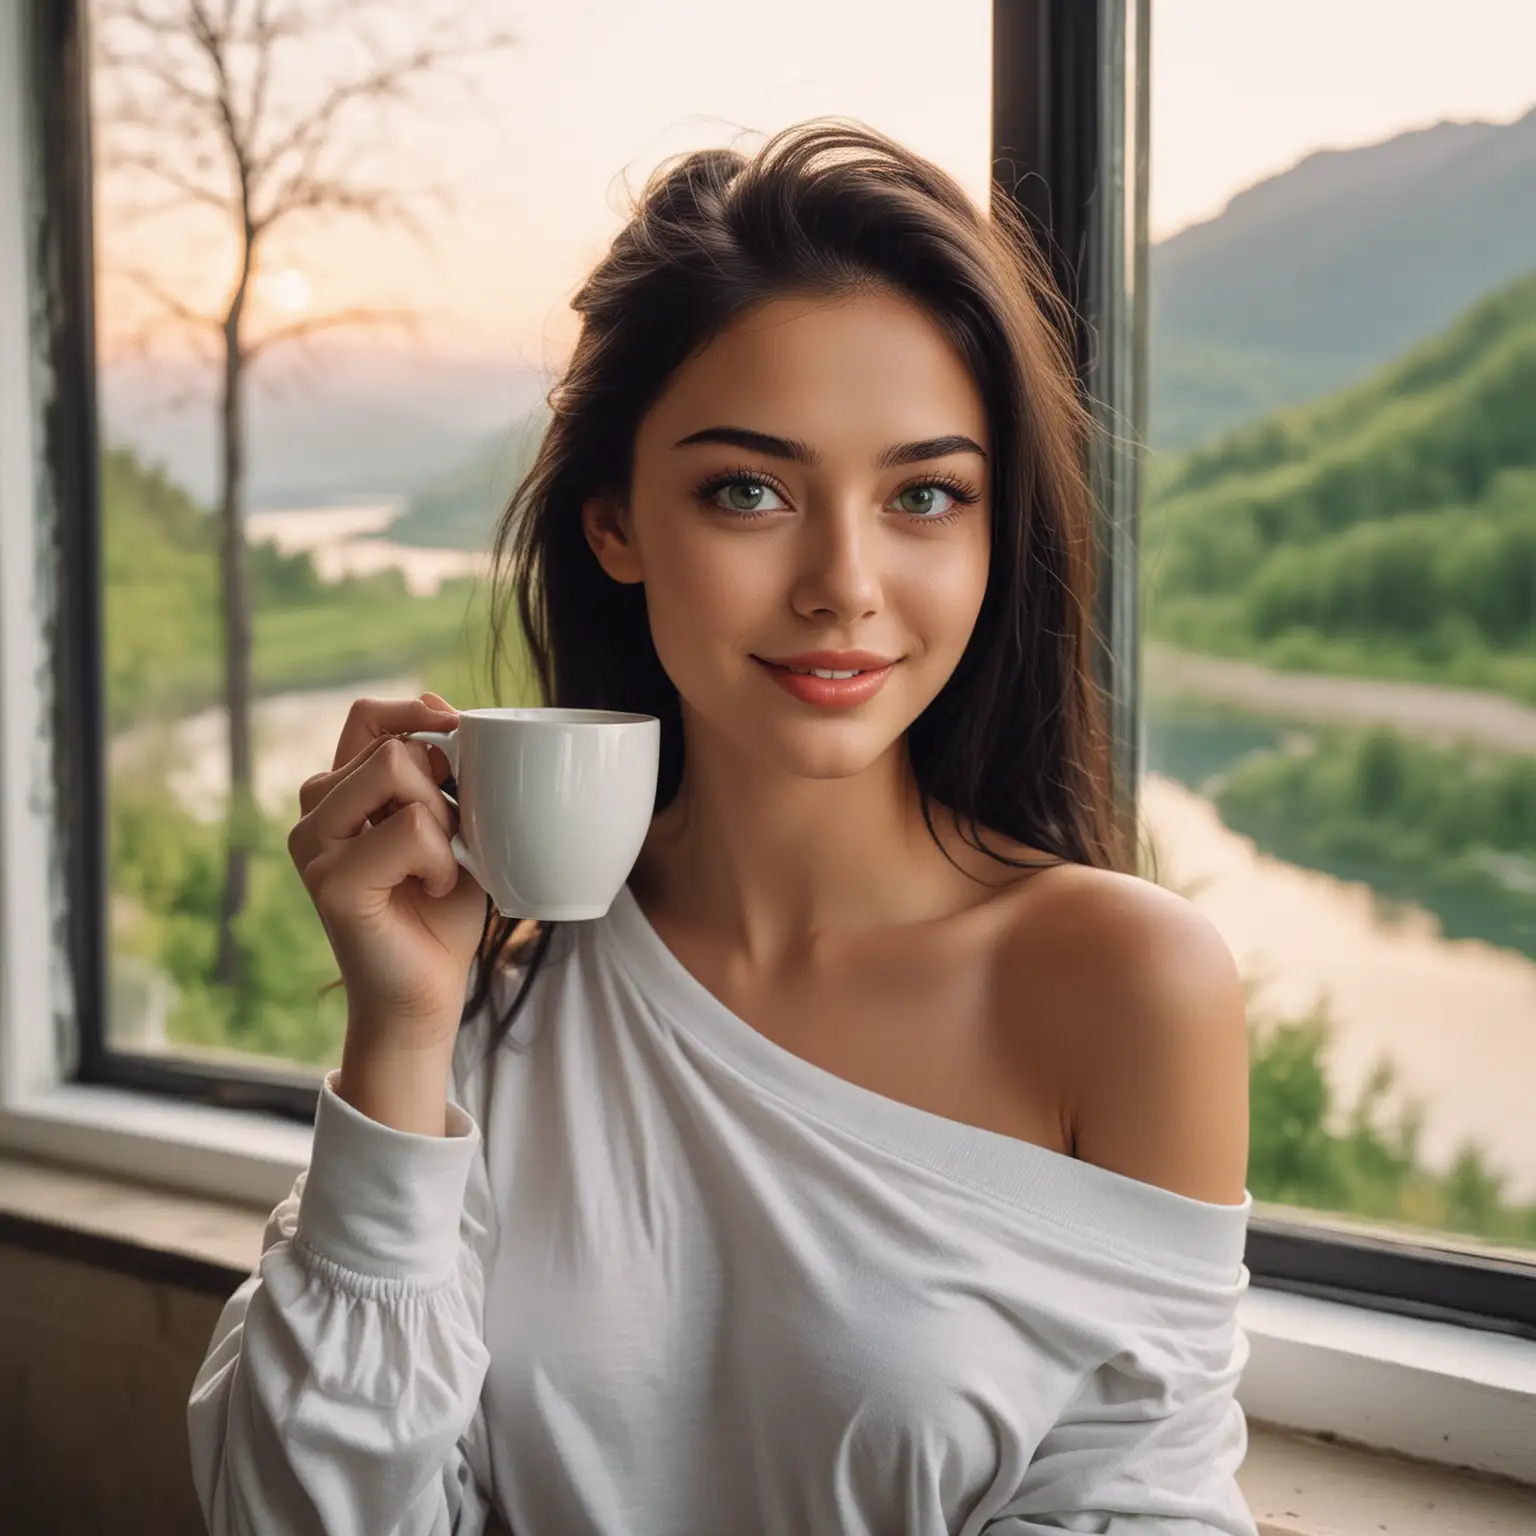 A 20-year-old girl with high cheekbones, almond-shaped emerald green eyes,eyes with long eyelashes,upturned slender nose, full lips with large teeth. She smiles while drinking american coffee in front of a very large window, through which a splendid spring panorama with lakes and hills at dawn can be seen. Her black hair is gathered with a lot of volume. White one shoulder t-shirt .sexy model with big breast 